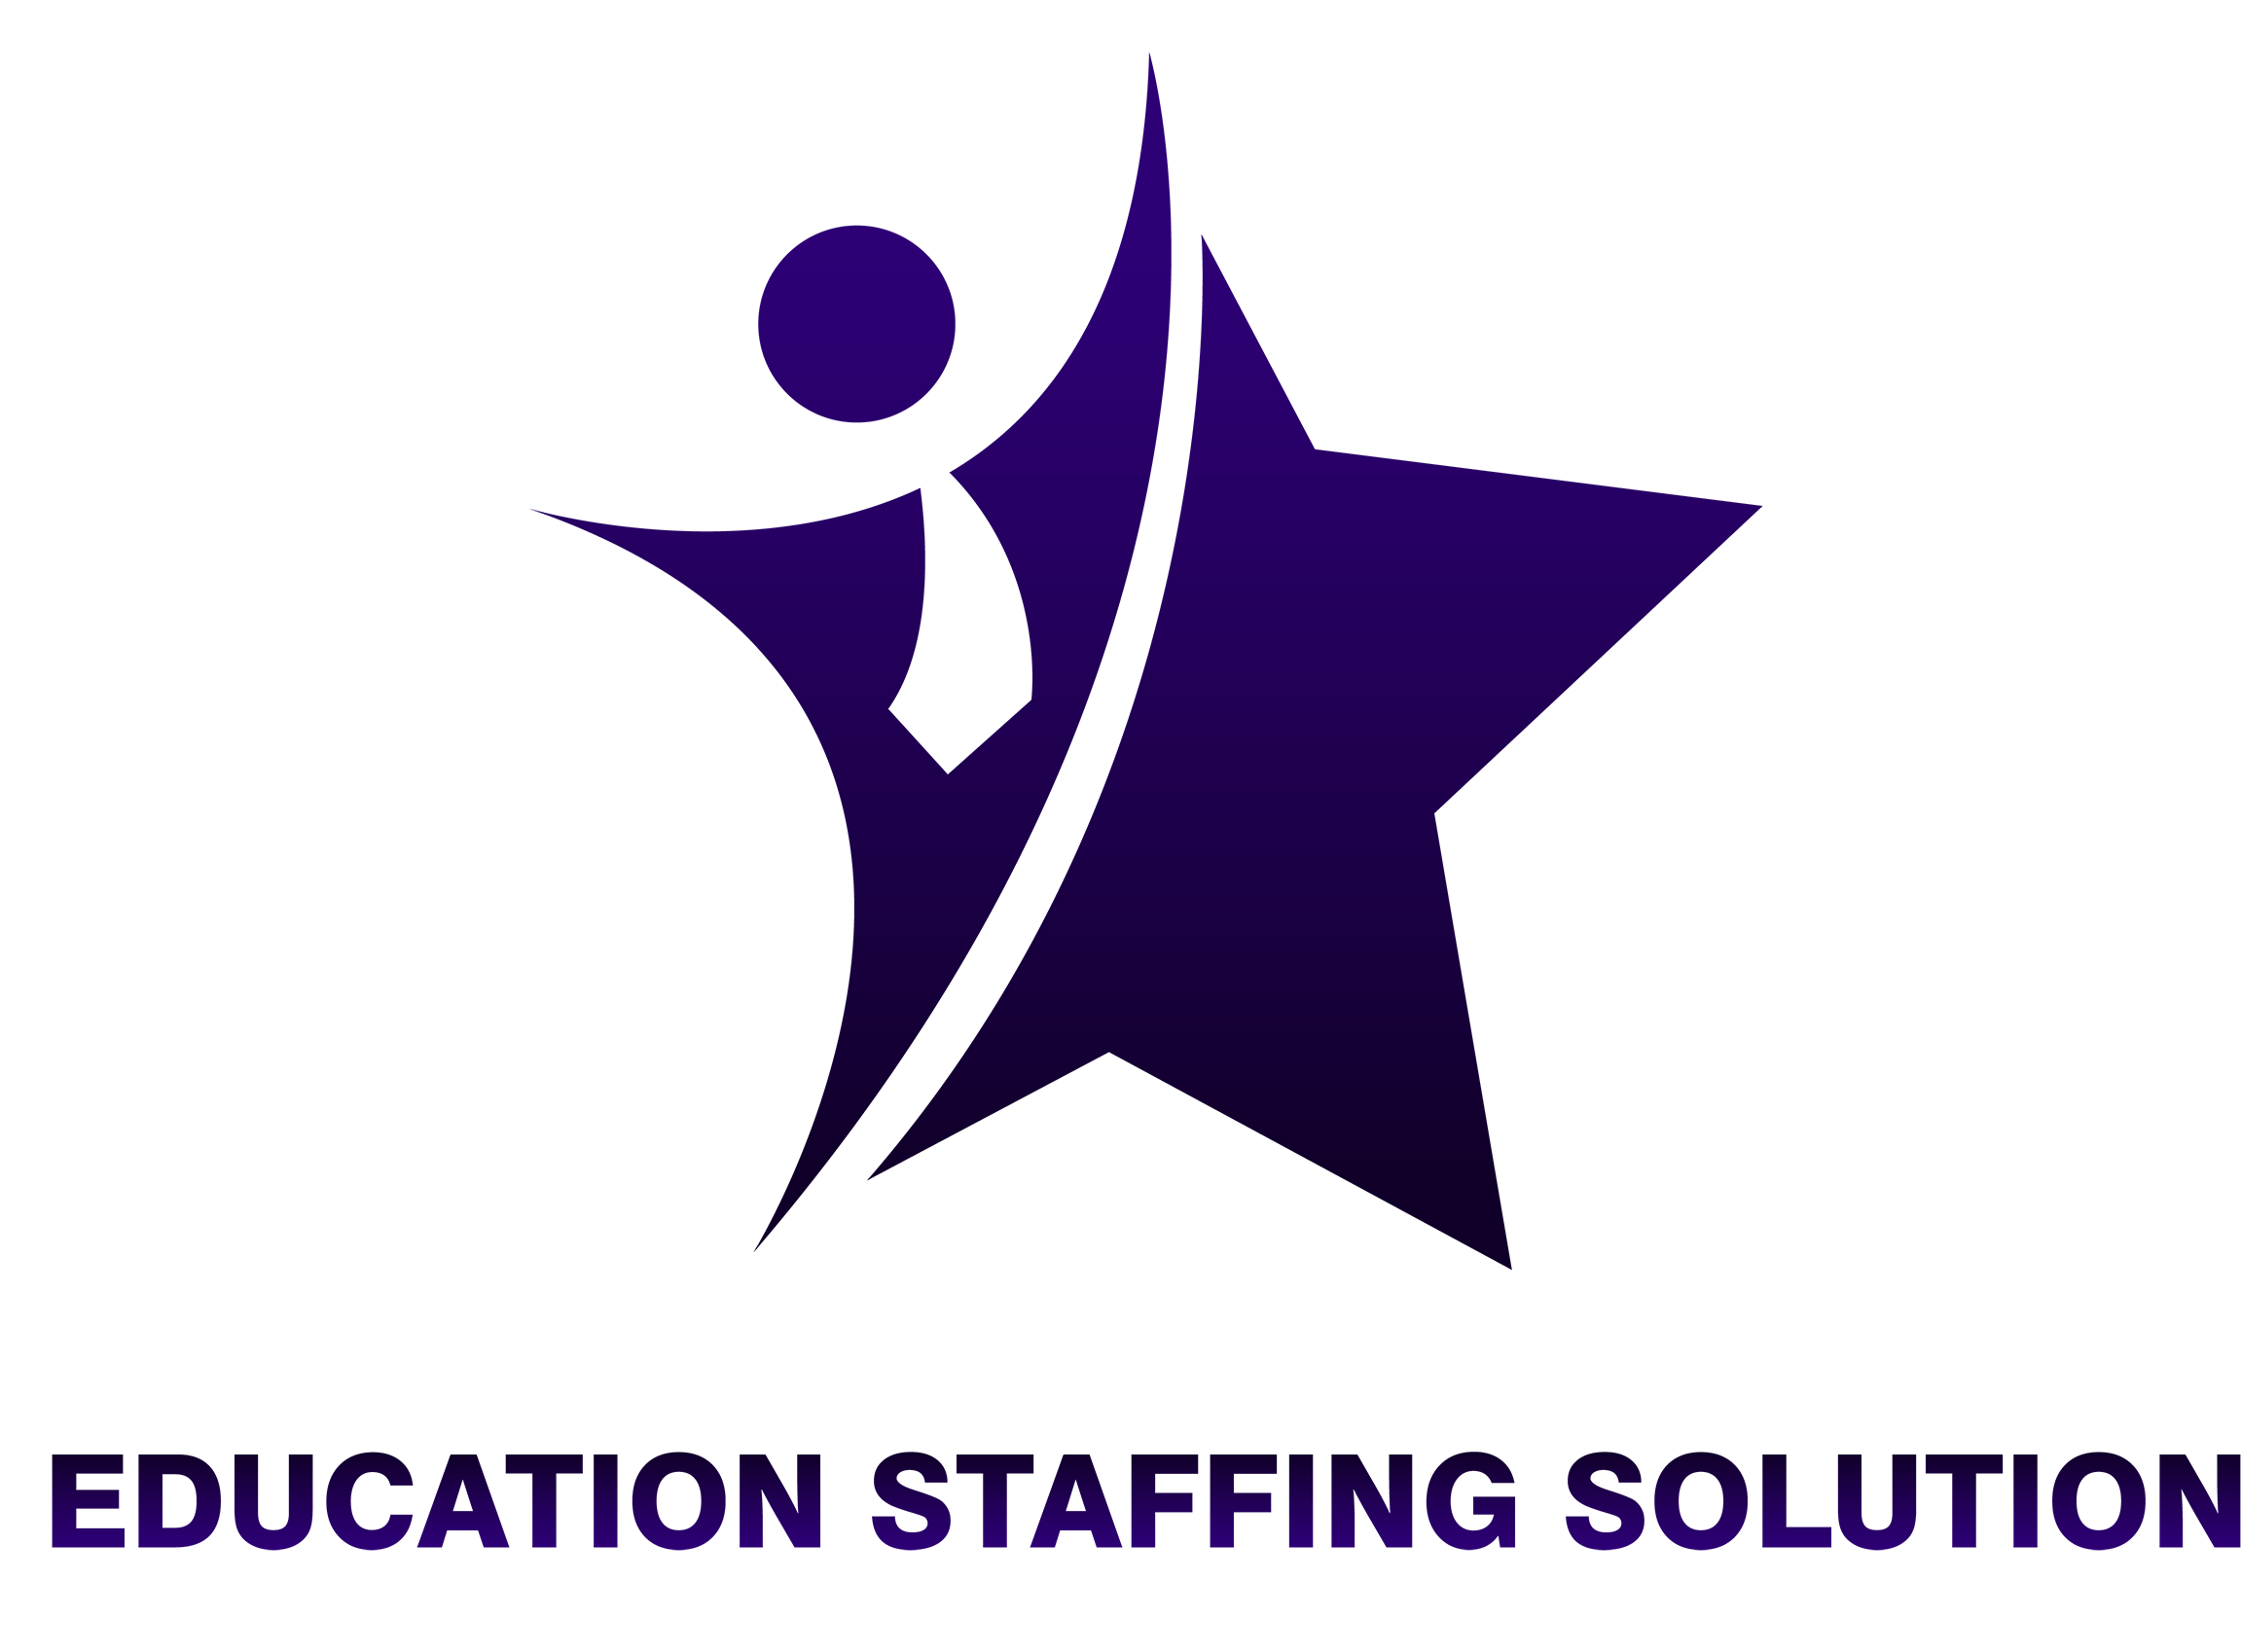 Education Staffing Solution